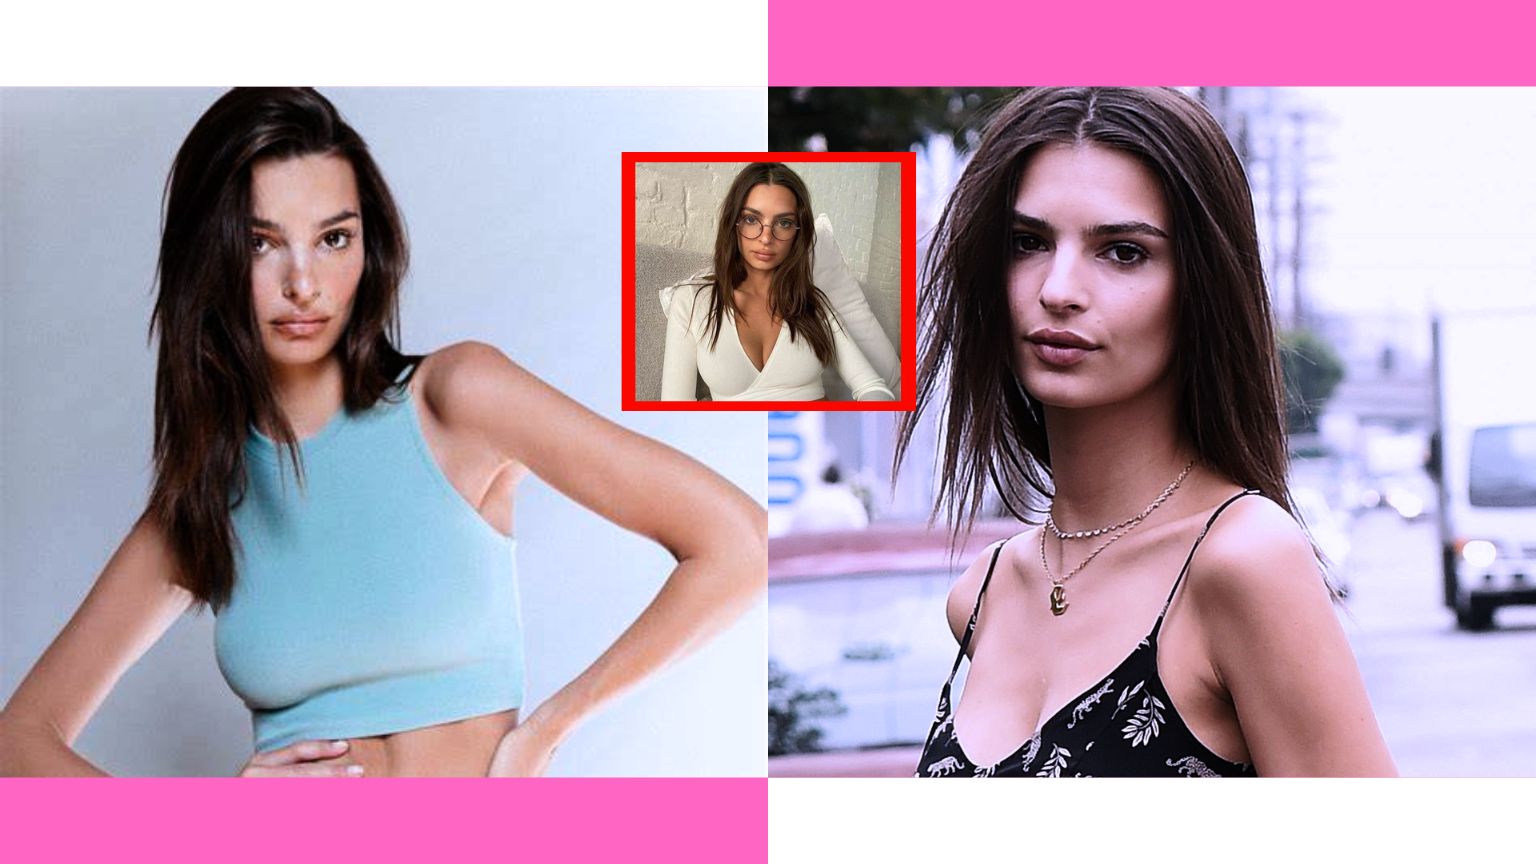 Emily Ratajkowski experiences a wardrobe malfunction in a 'see-through' crop top during a sultry photoshoot